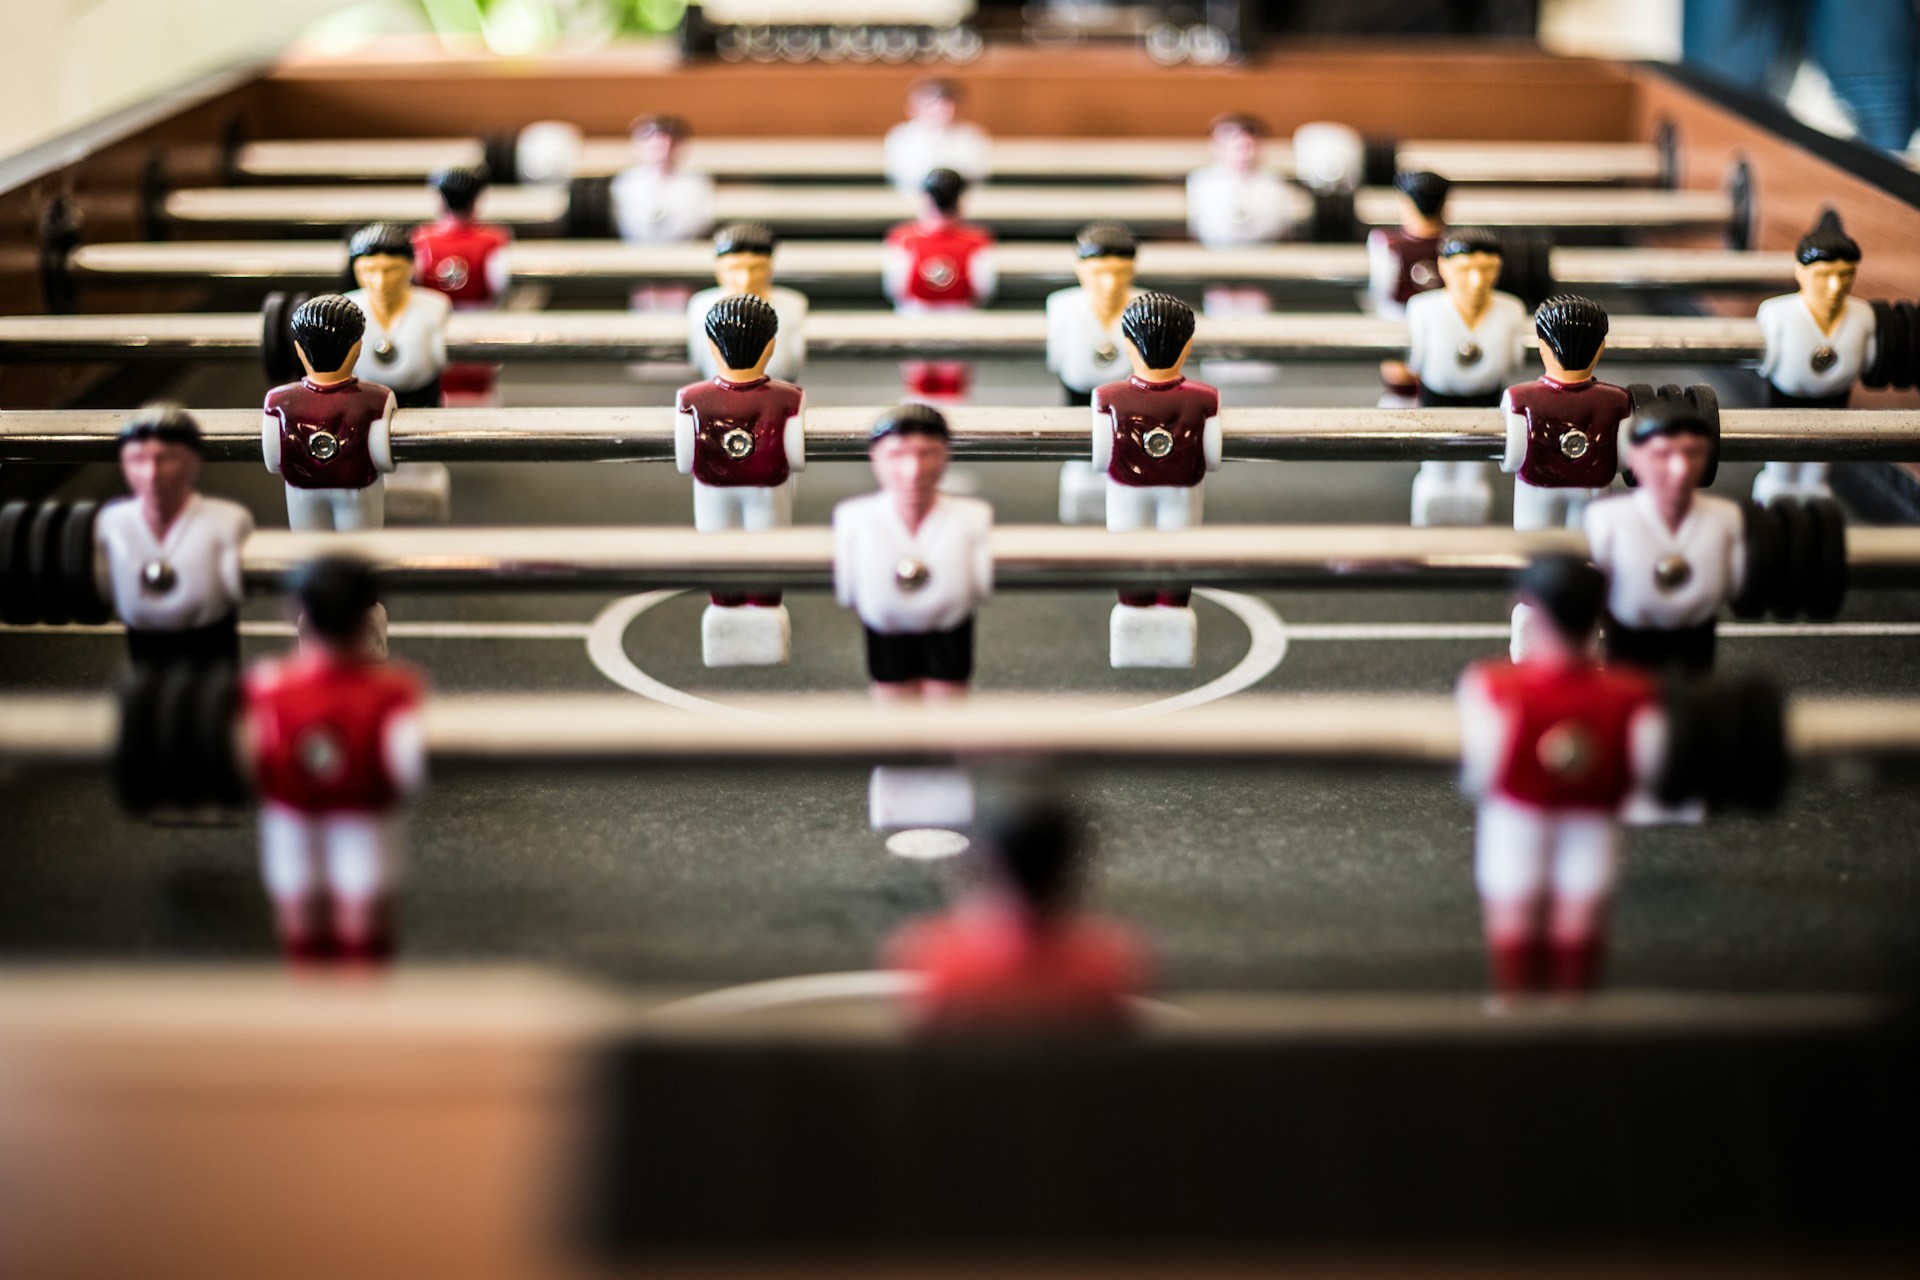 close-up of a table football game